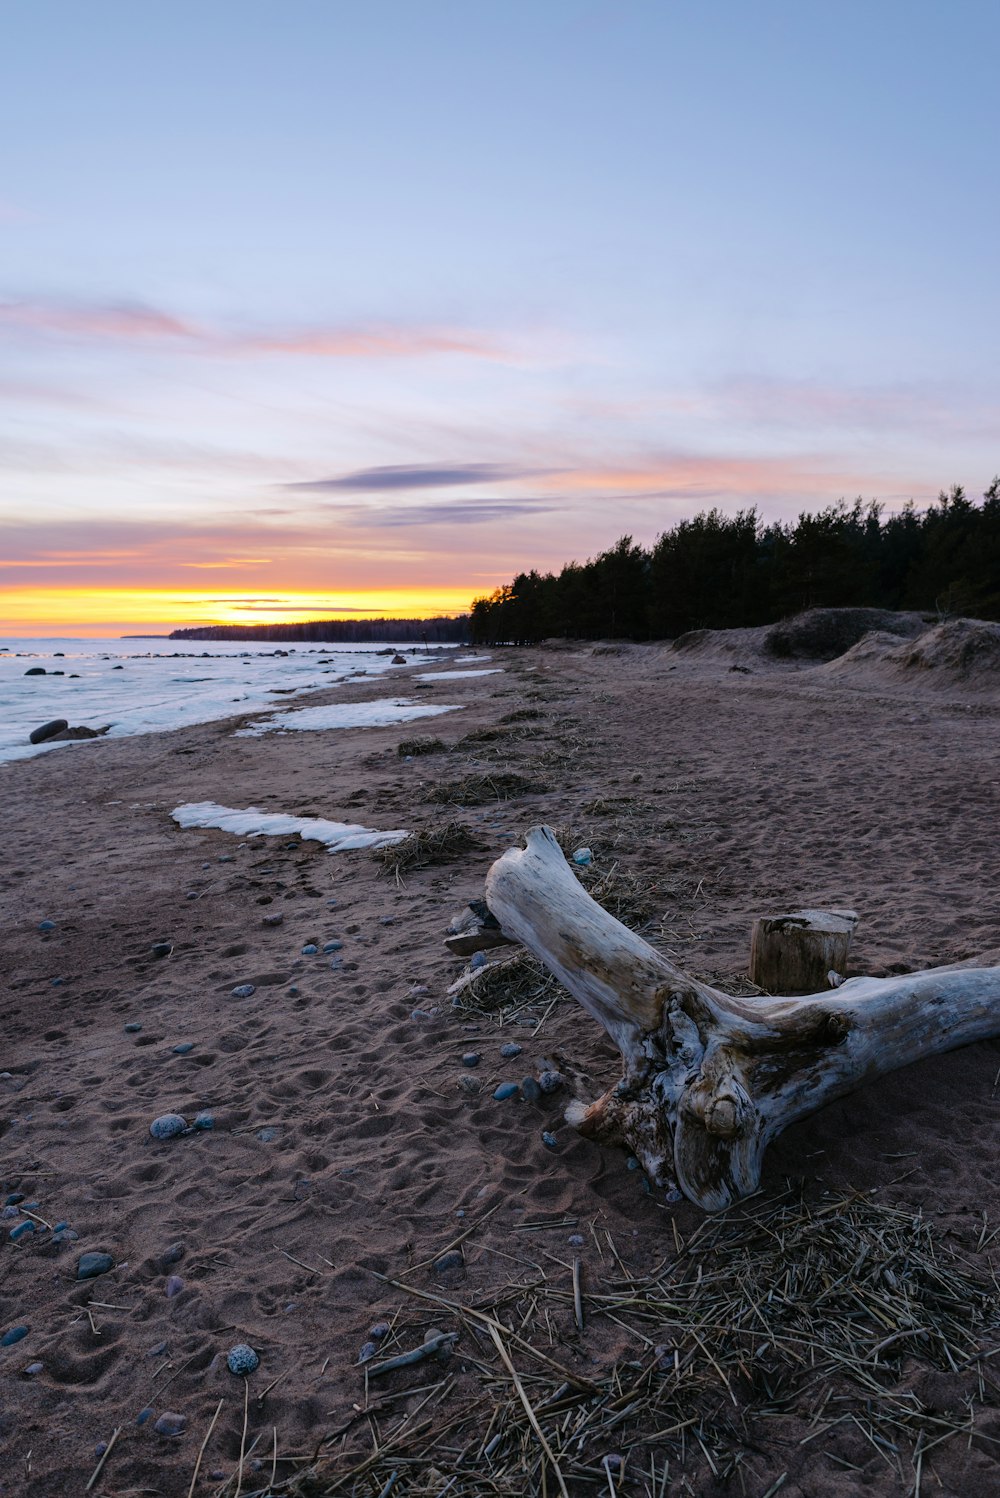 a driftwood on a beach with a sunset in the background